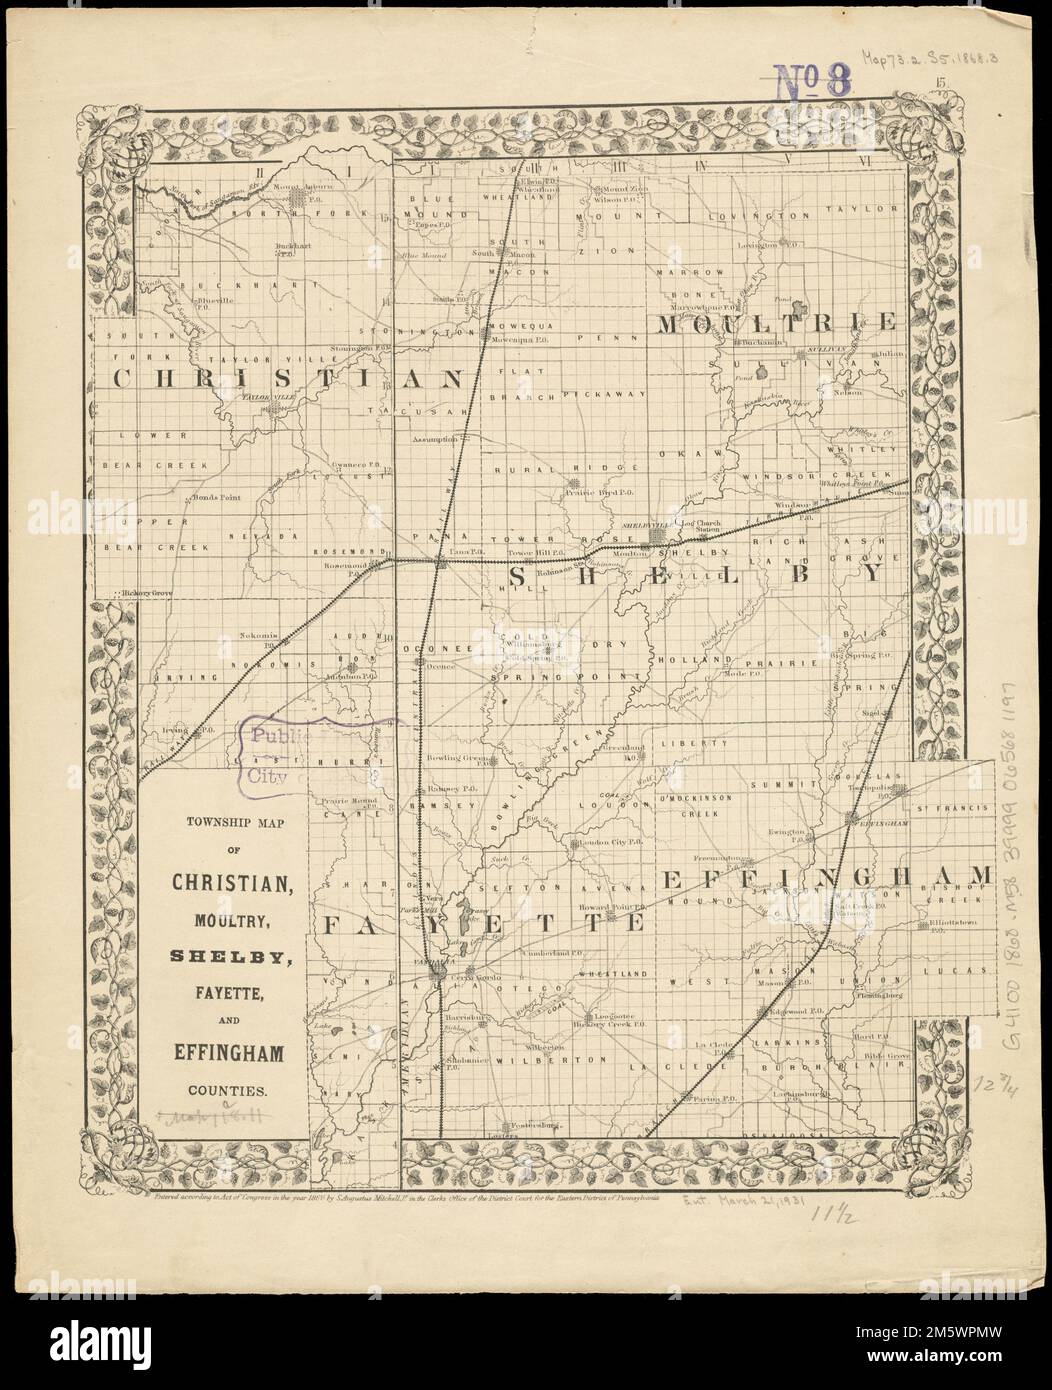 Township map of Christian, Moultry, Shelby, Fayette, and Effingham Counties. In upper right: 15. Stamped in purple in upper right: No. 8. Part of a collection of maps of Illinois counties.... , Illinois  , Christian  ,county  Illinois  , Effingham  ,county  Illinois  , Fayette  ,county  Illinois  , Moultrie  ,county  Illinois  , Shelby  ,county Stock Photo